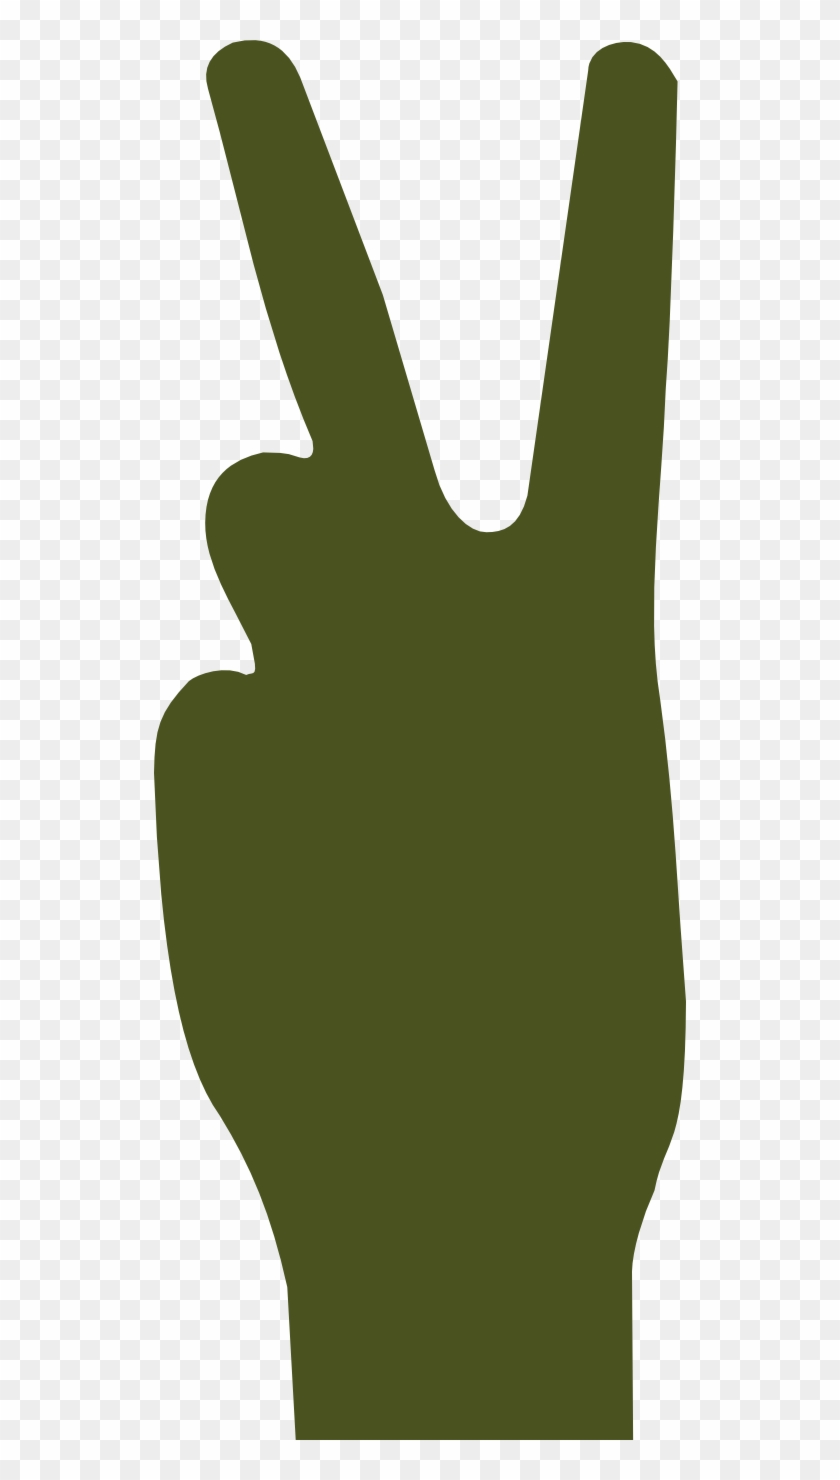 Army Green V Sign Peace Svg Scalable Vector Graphics - Scalable Vector Graphics #170896